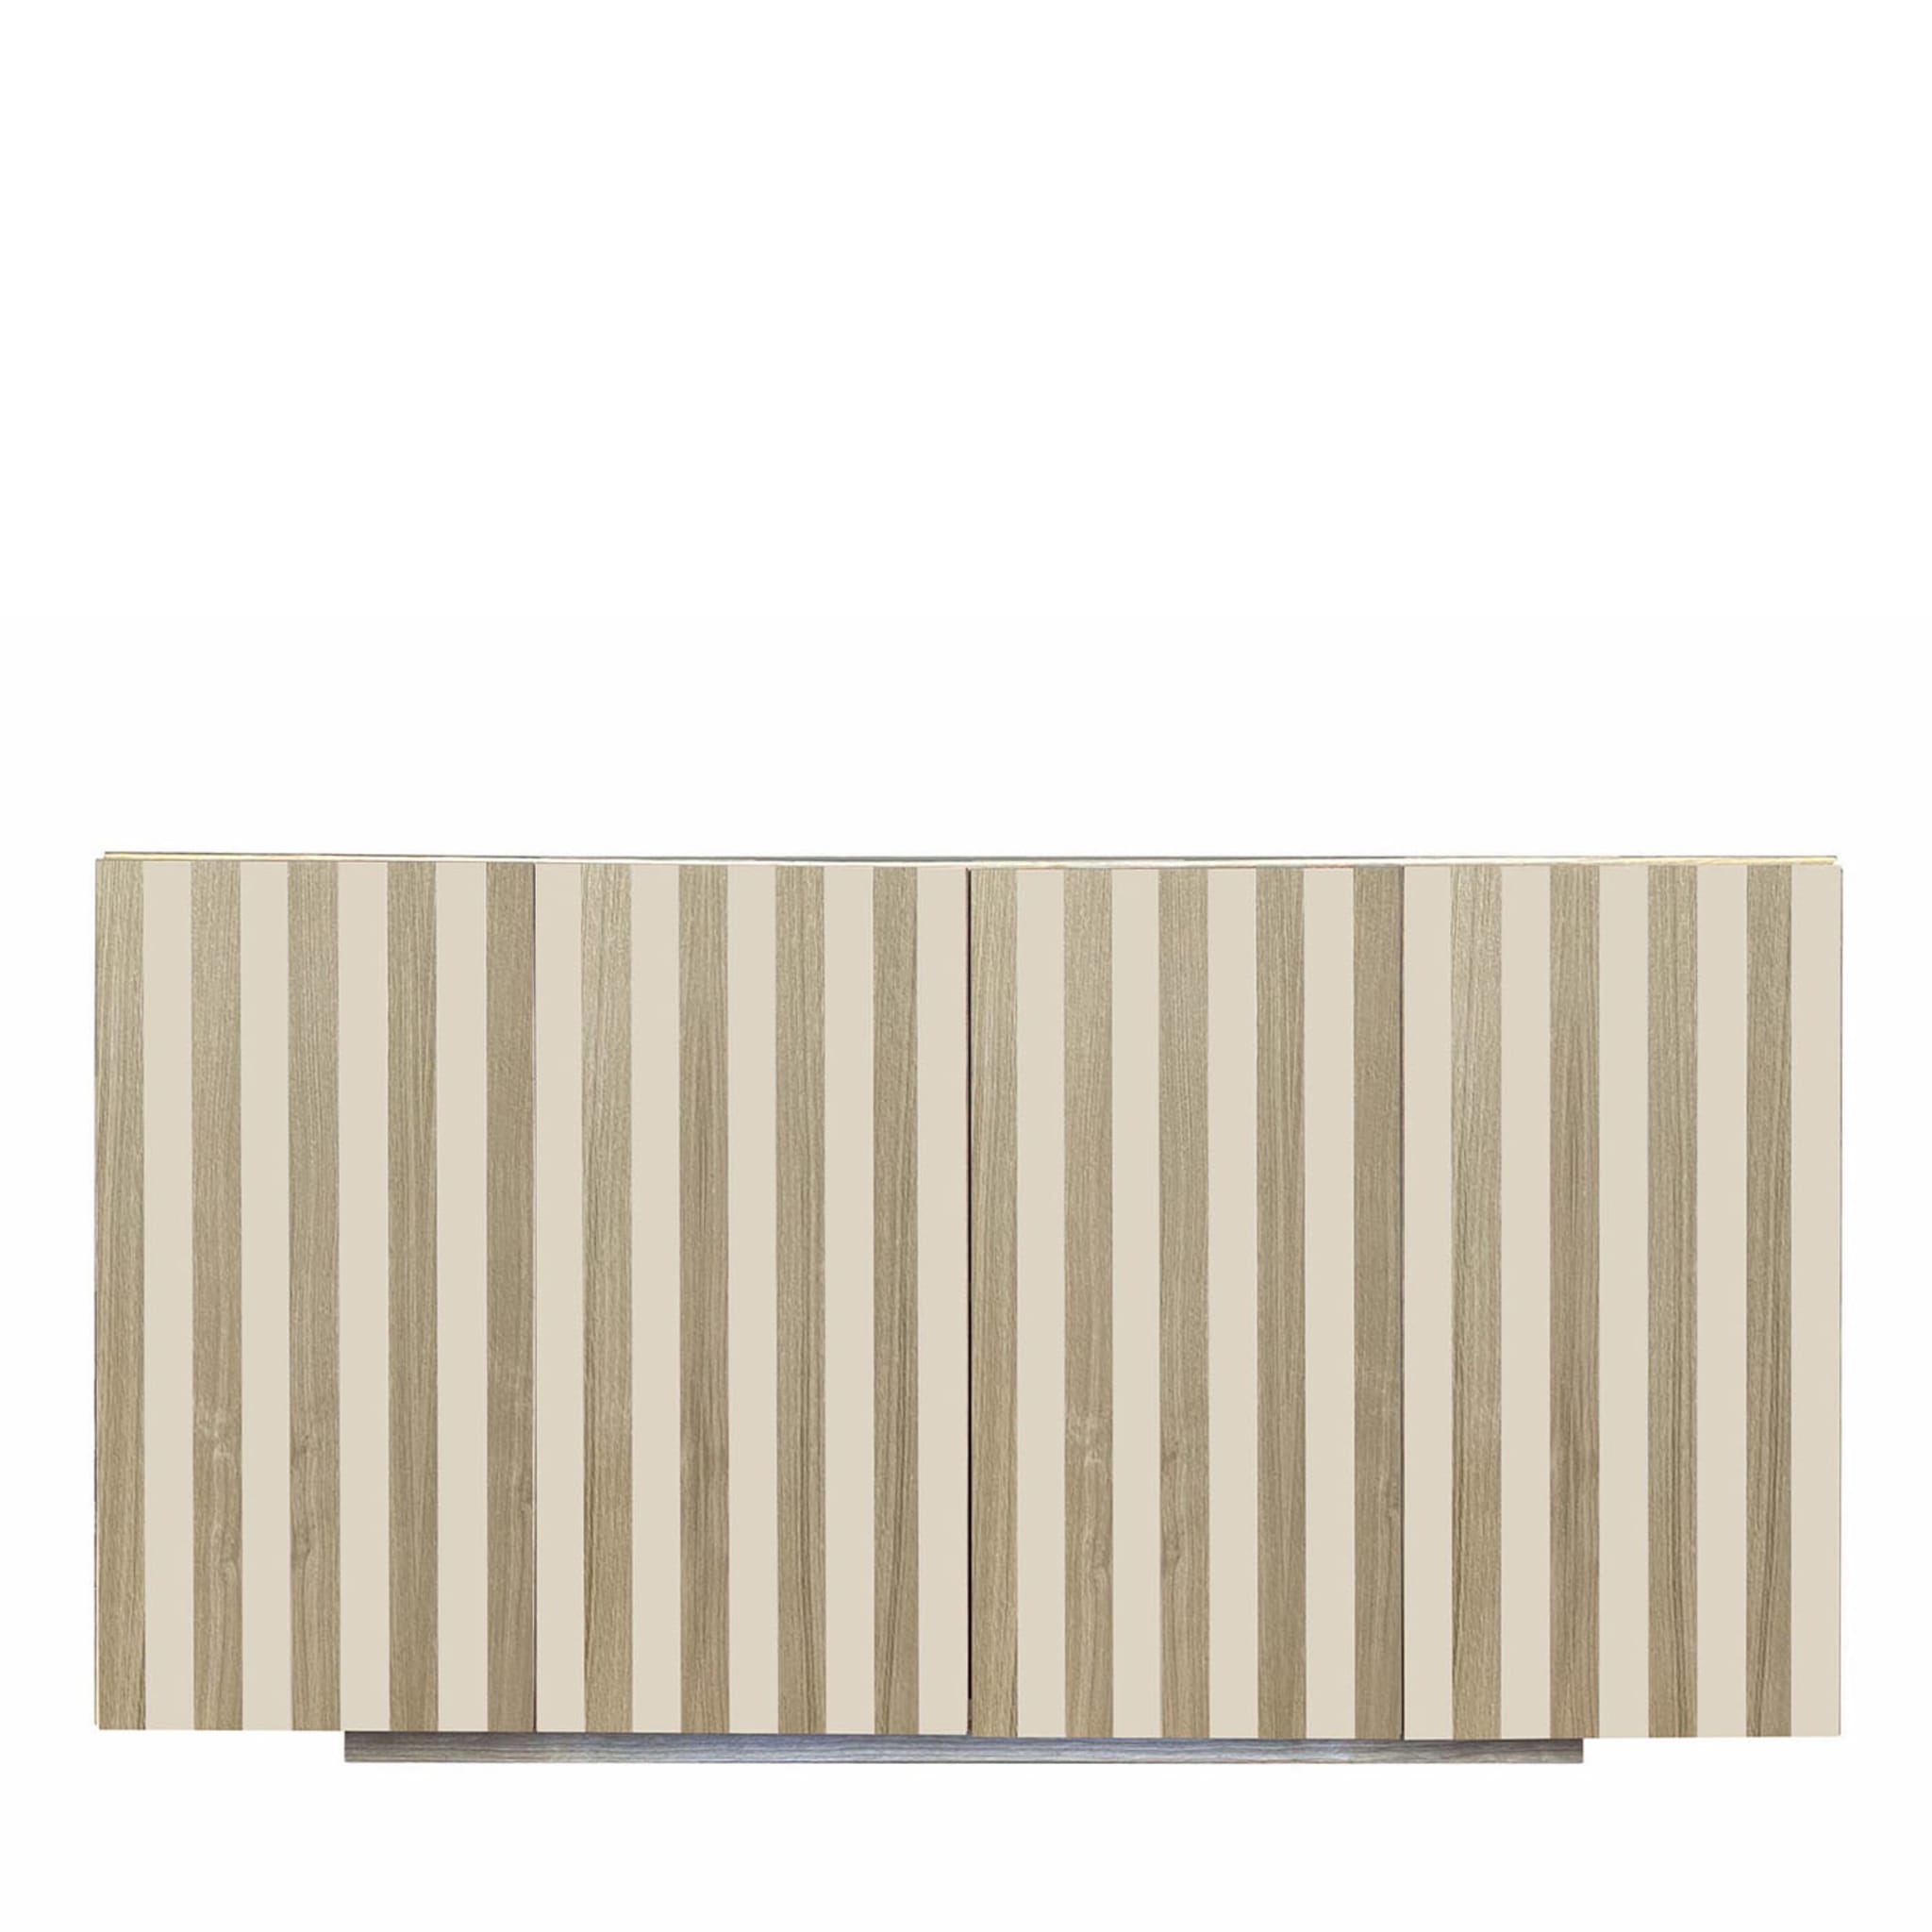 Md4 4-Door Striped Sideboard by Meccani Studio - Main view